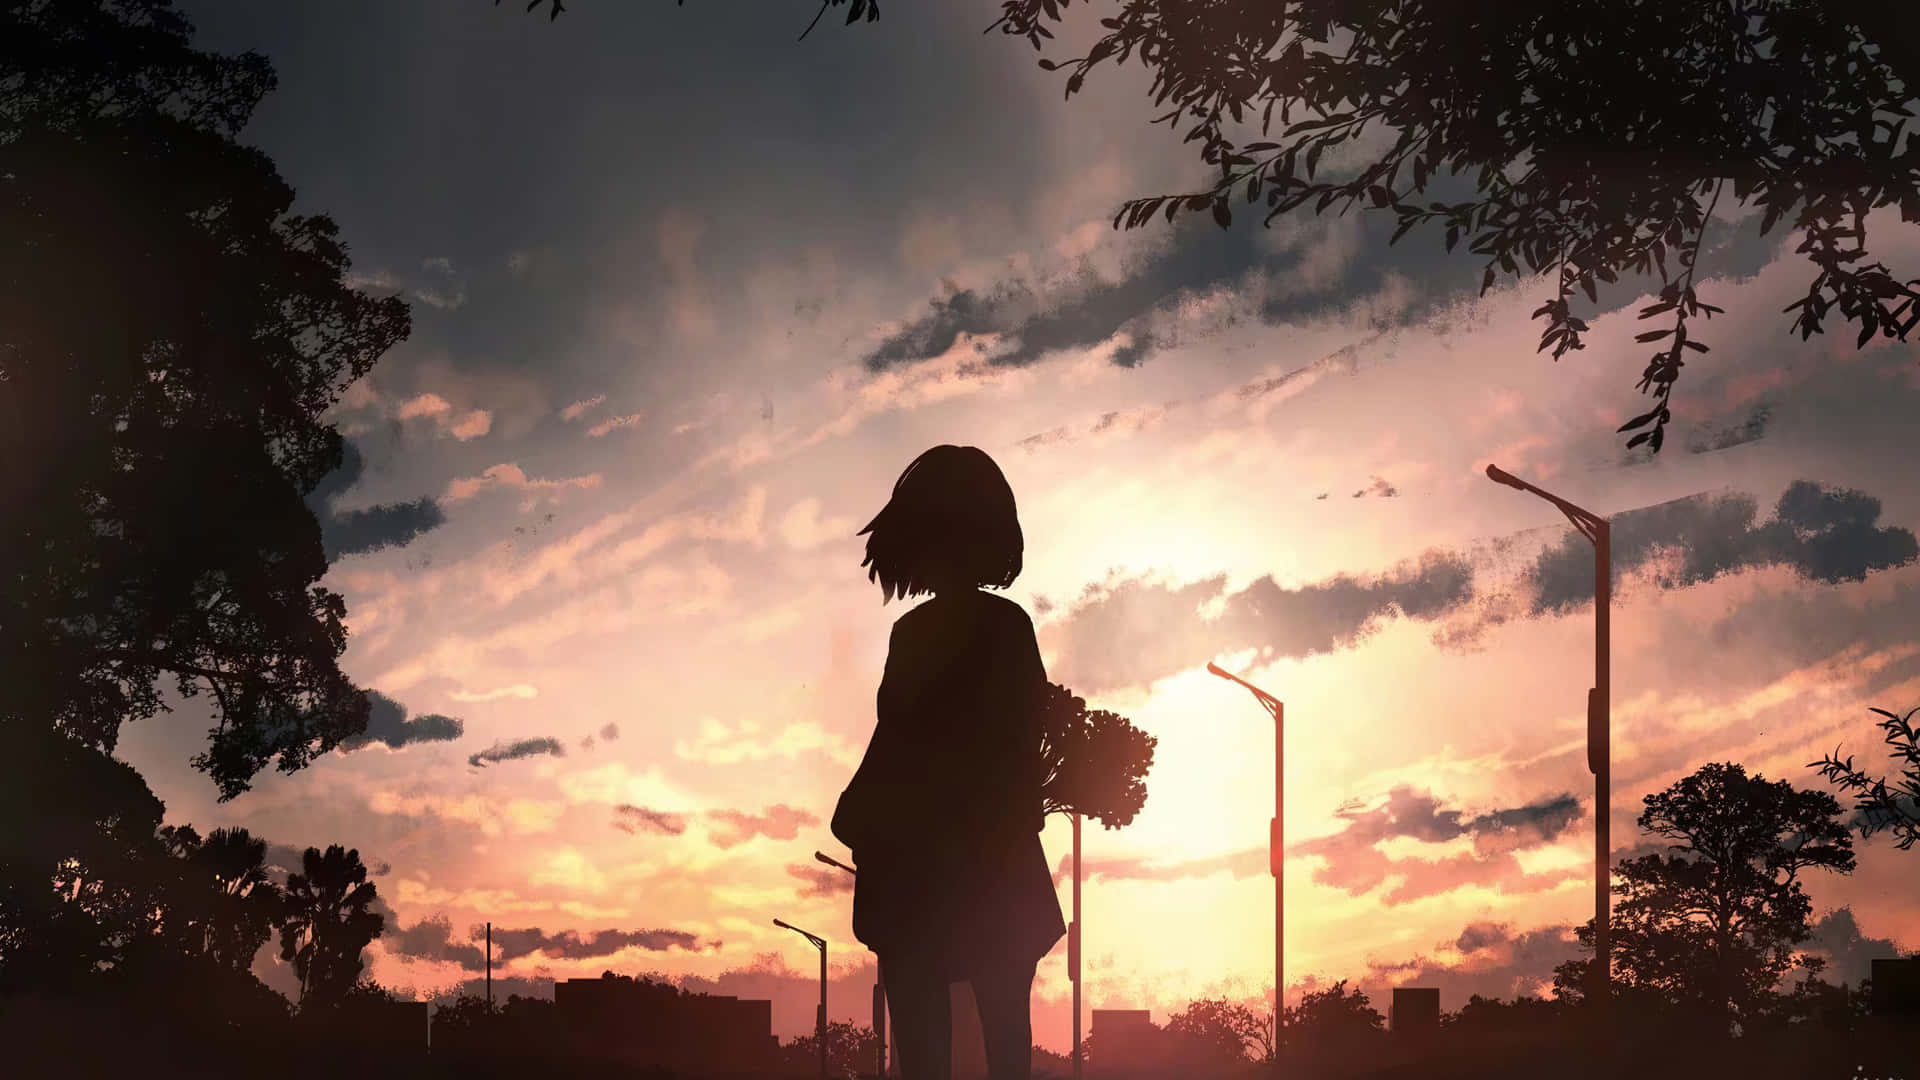 Anime Sunset With Girl Silhouette Background